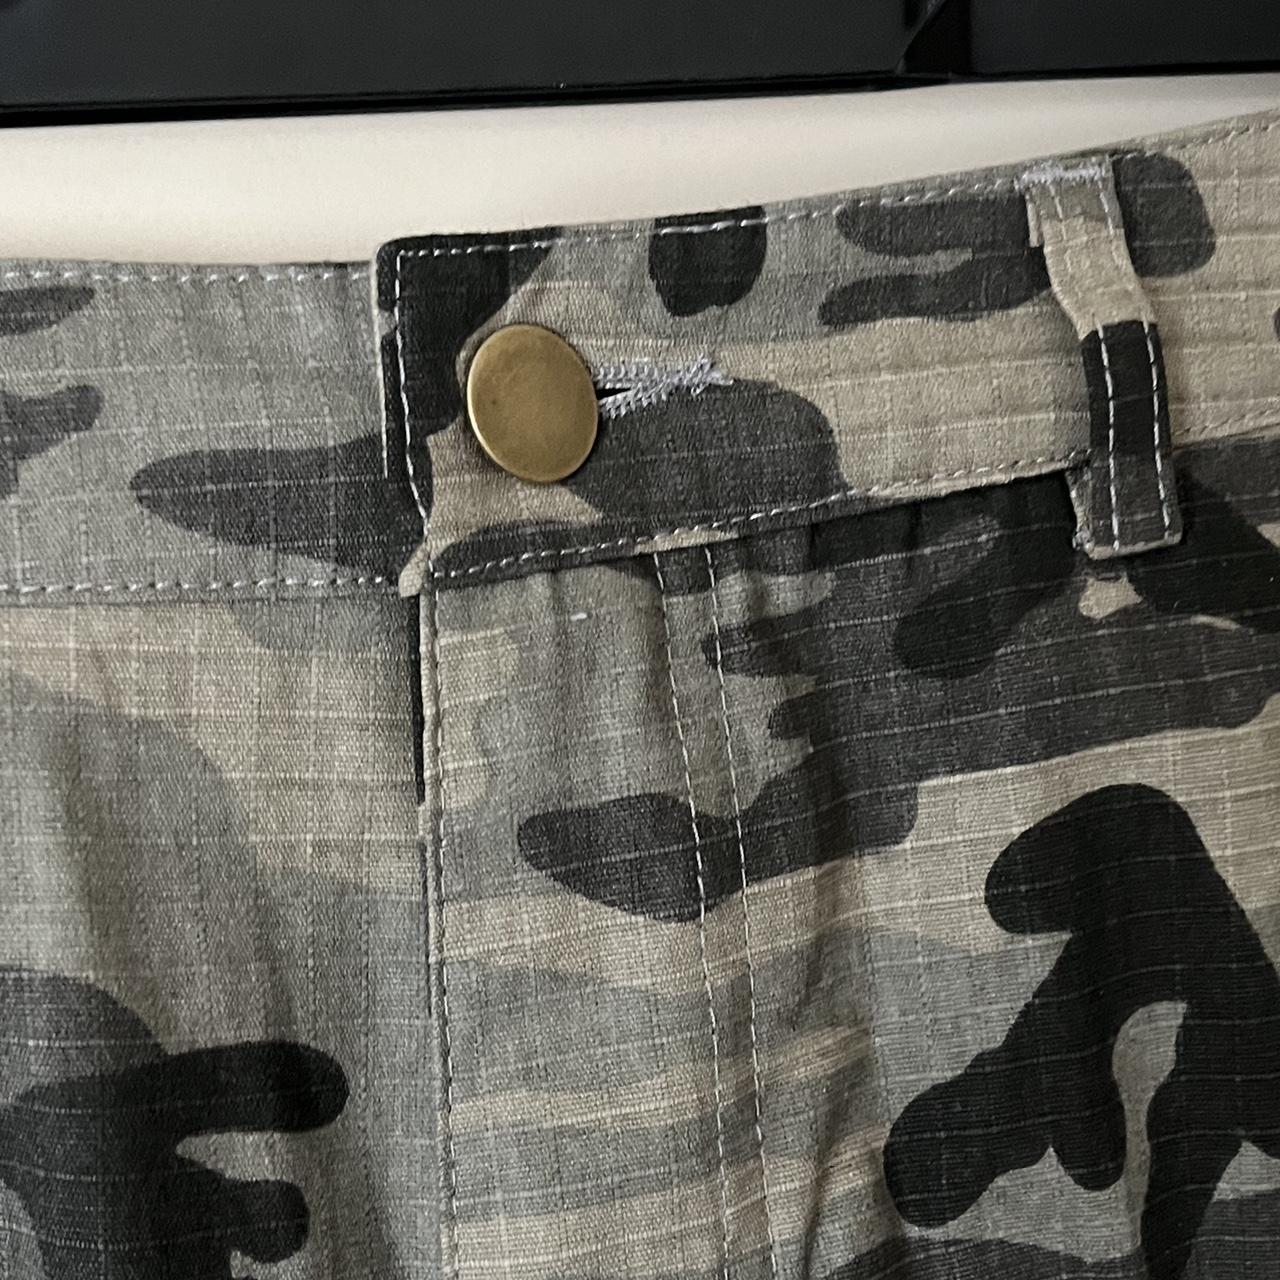 Pretty Little Thing Camouflage Camo Cargo... - Depop